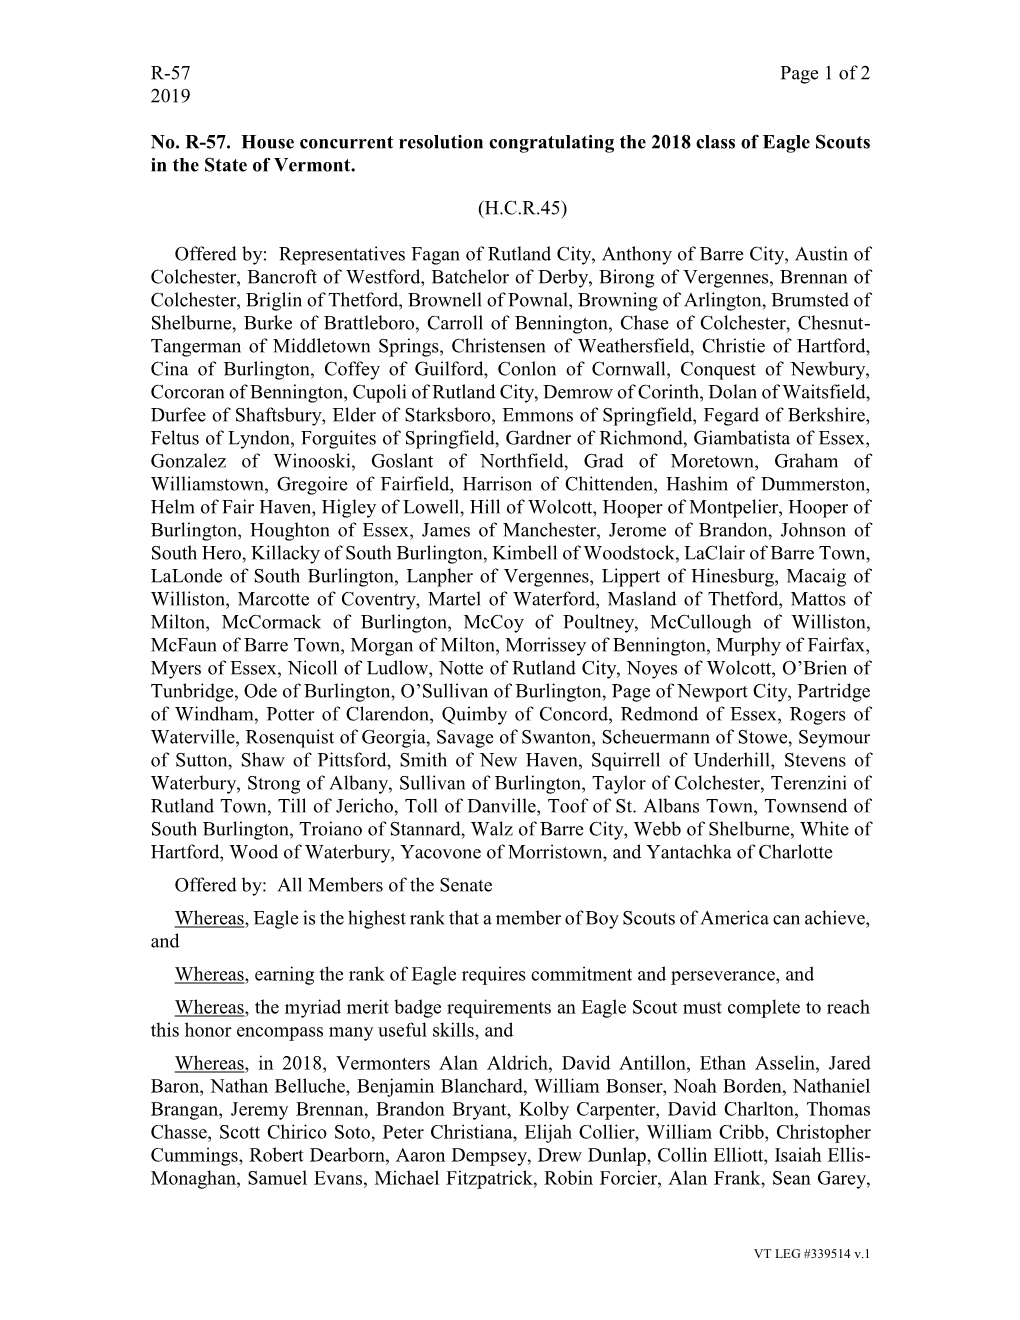 R-57 Page 1 of 2 2019 No. R-57. House Concurrent Resolution